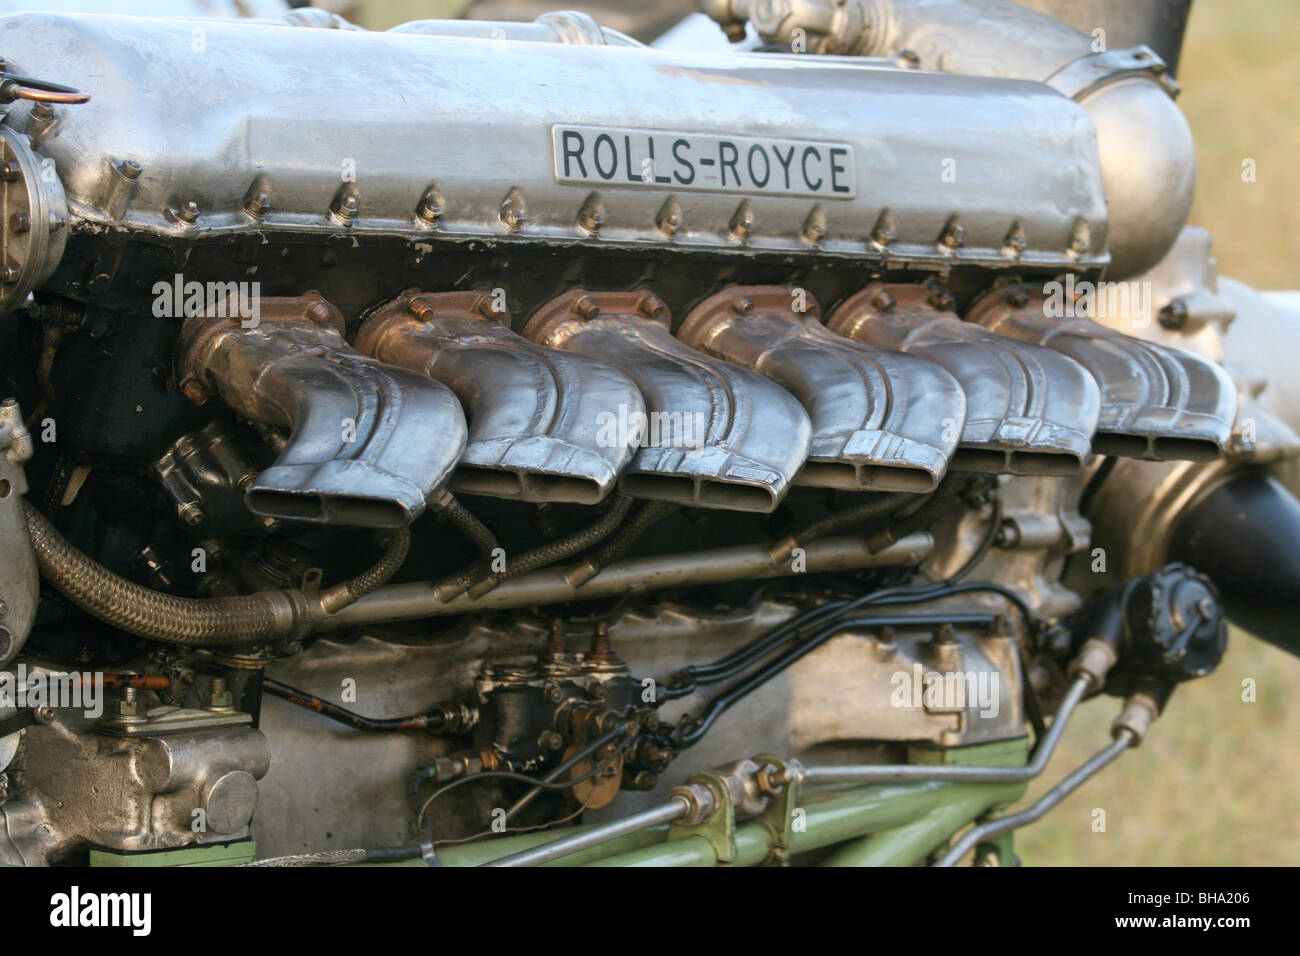 Detail of the Rolls-Royce Merlin Engine used in the Spitfire fighter planes  in the second world war Stock Photo - Alamy